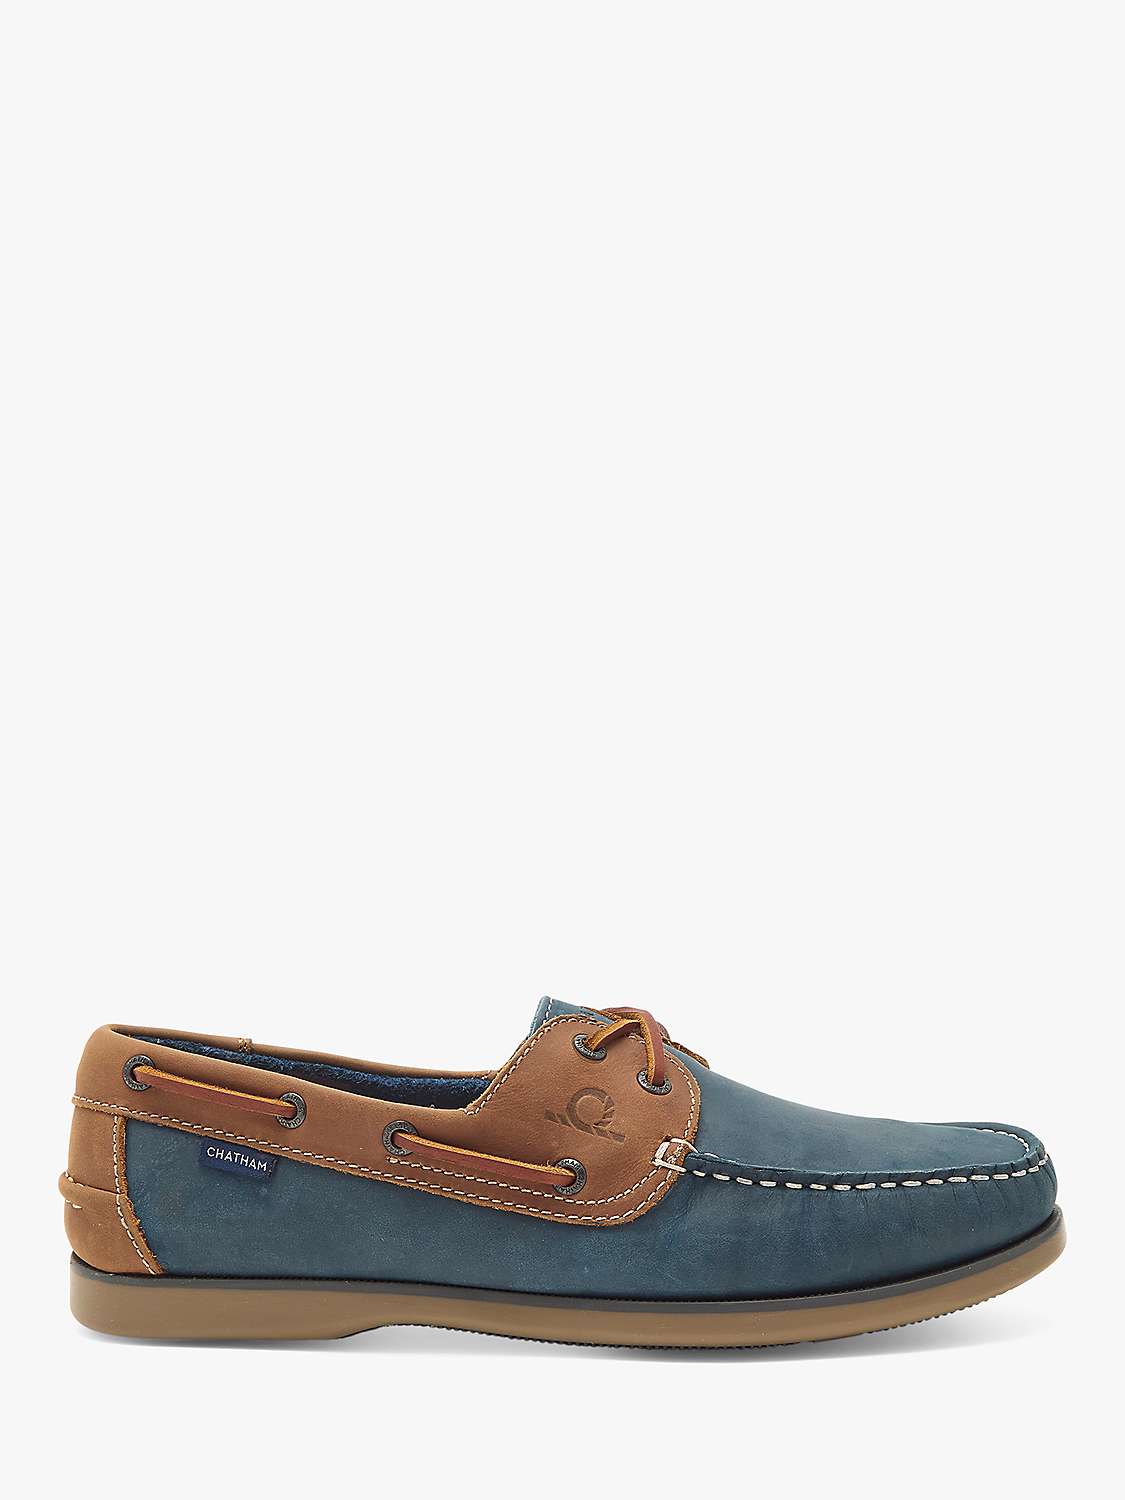 Buy Chatham Whitstable Leather Boat Shoes, Navy/Tan Online at johnlewis.com